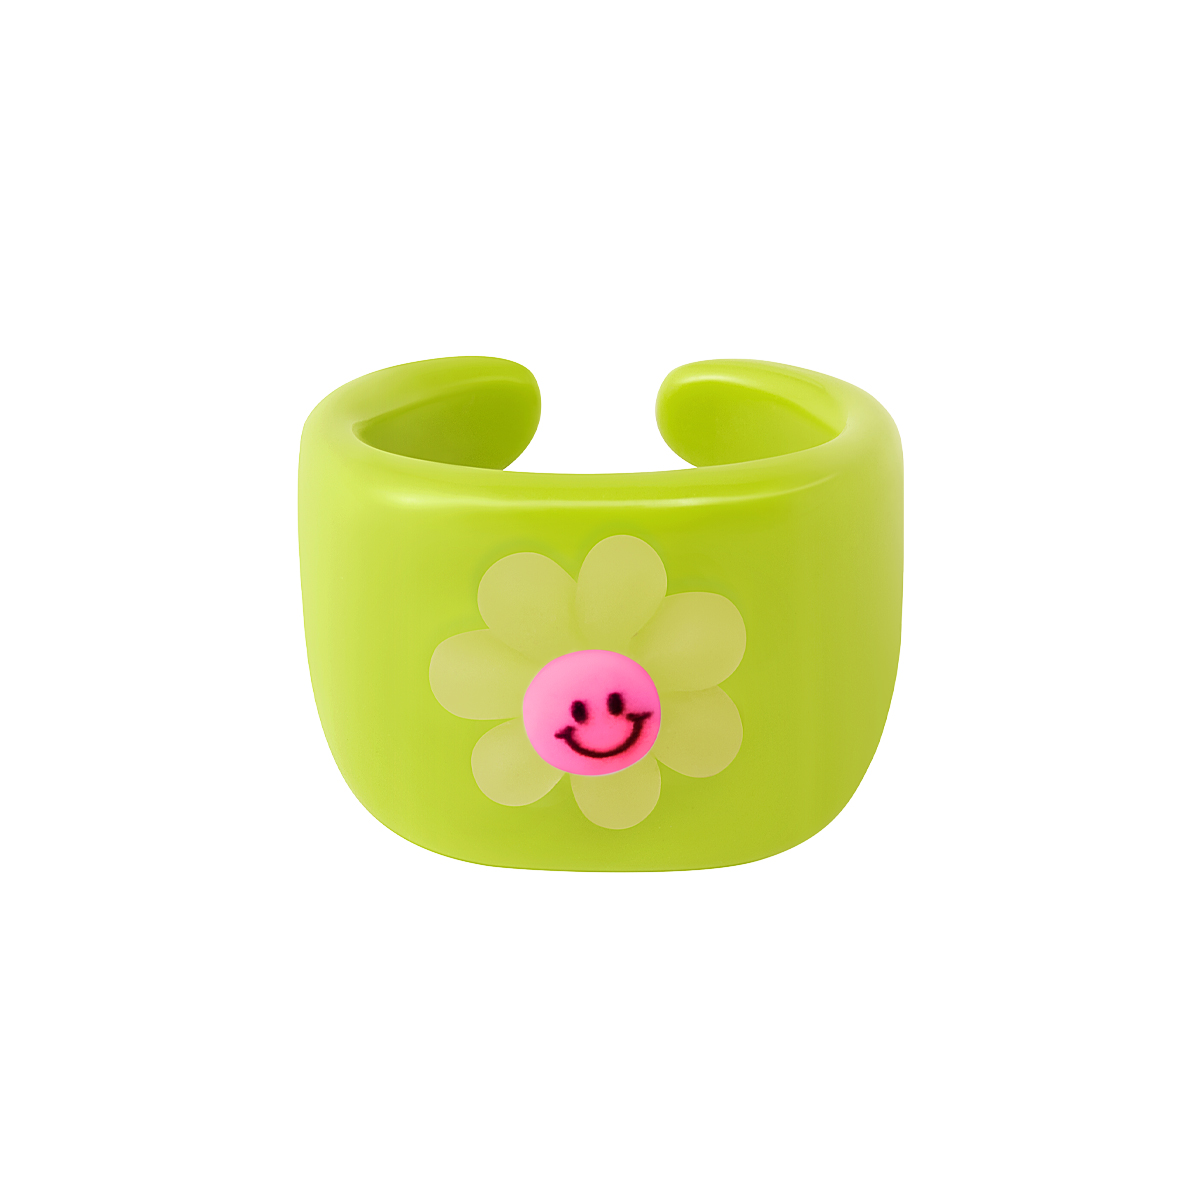 Flower candy ring